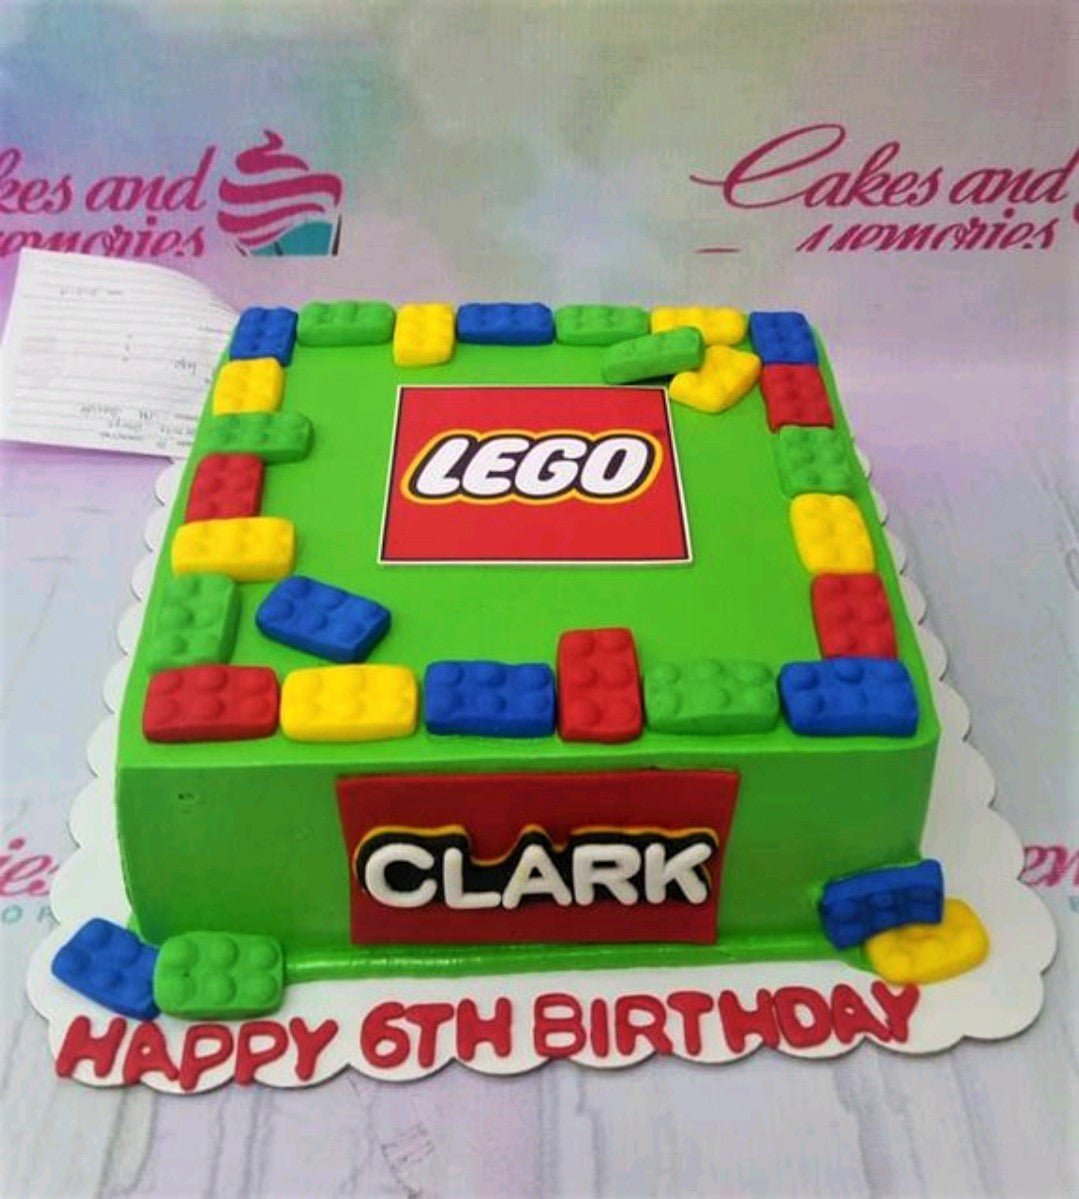 Lego Cake - 1117 – Cakes and Memories Bakeshop